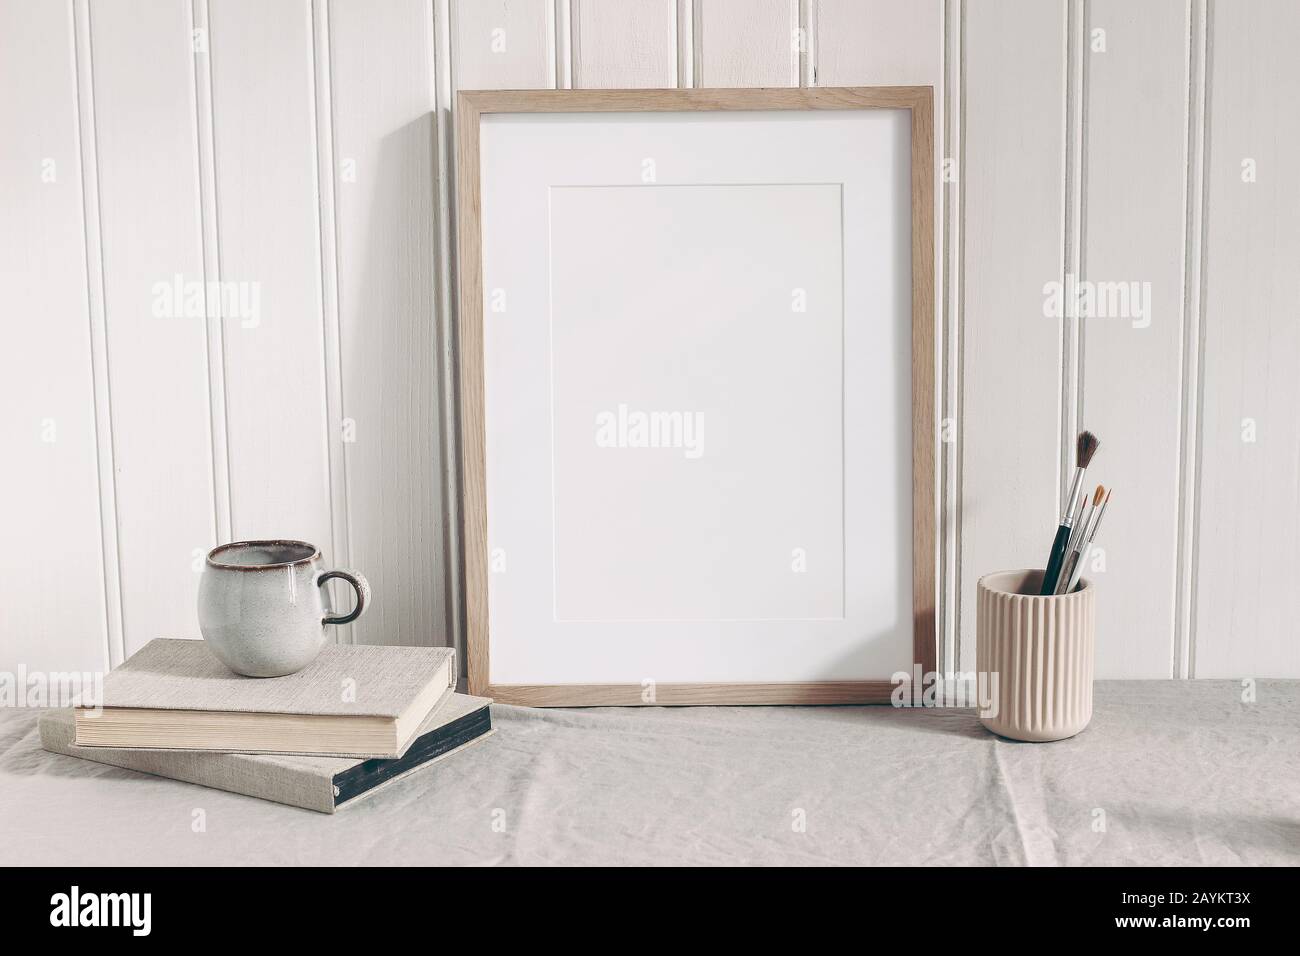 Blank wooden frame mockup with paint brushes, pencils in ceramic holder, cup of coffee and books on linen tablecloth. Artistic scene. Creative table b Stock Photo